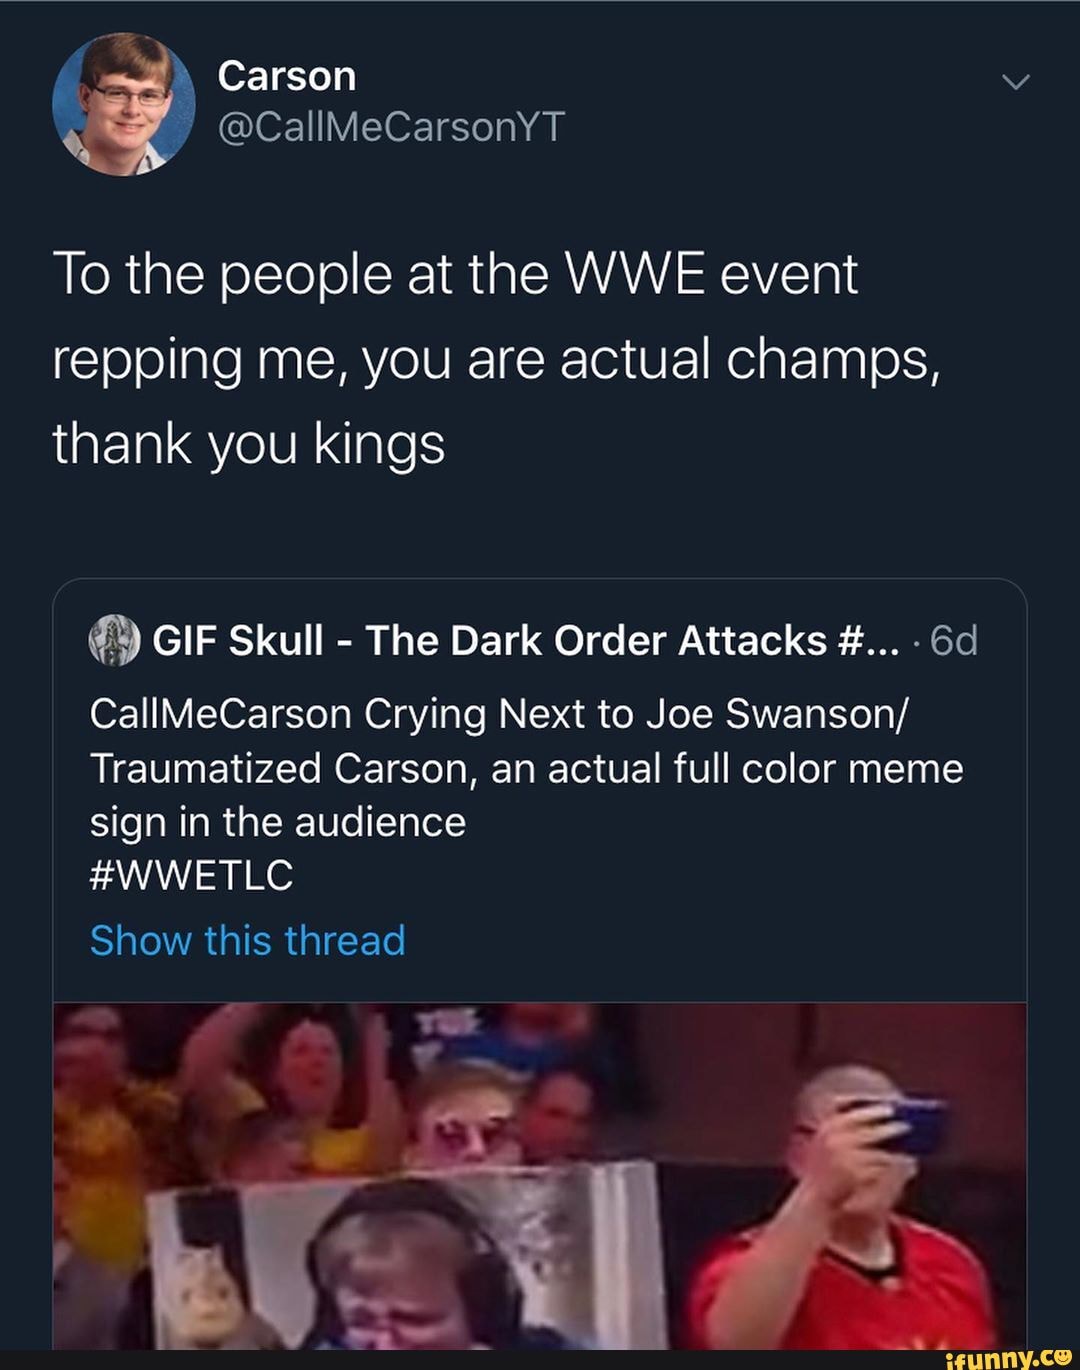 To The People At The Wwe Event Repping Me You Are Actual Champs Thank You Kings Y Gif Skull The Dark Order Attacks 6d Callmecarson Crying Next To Joe Swanson Traumatized Carson